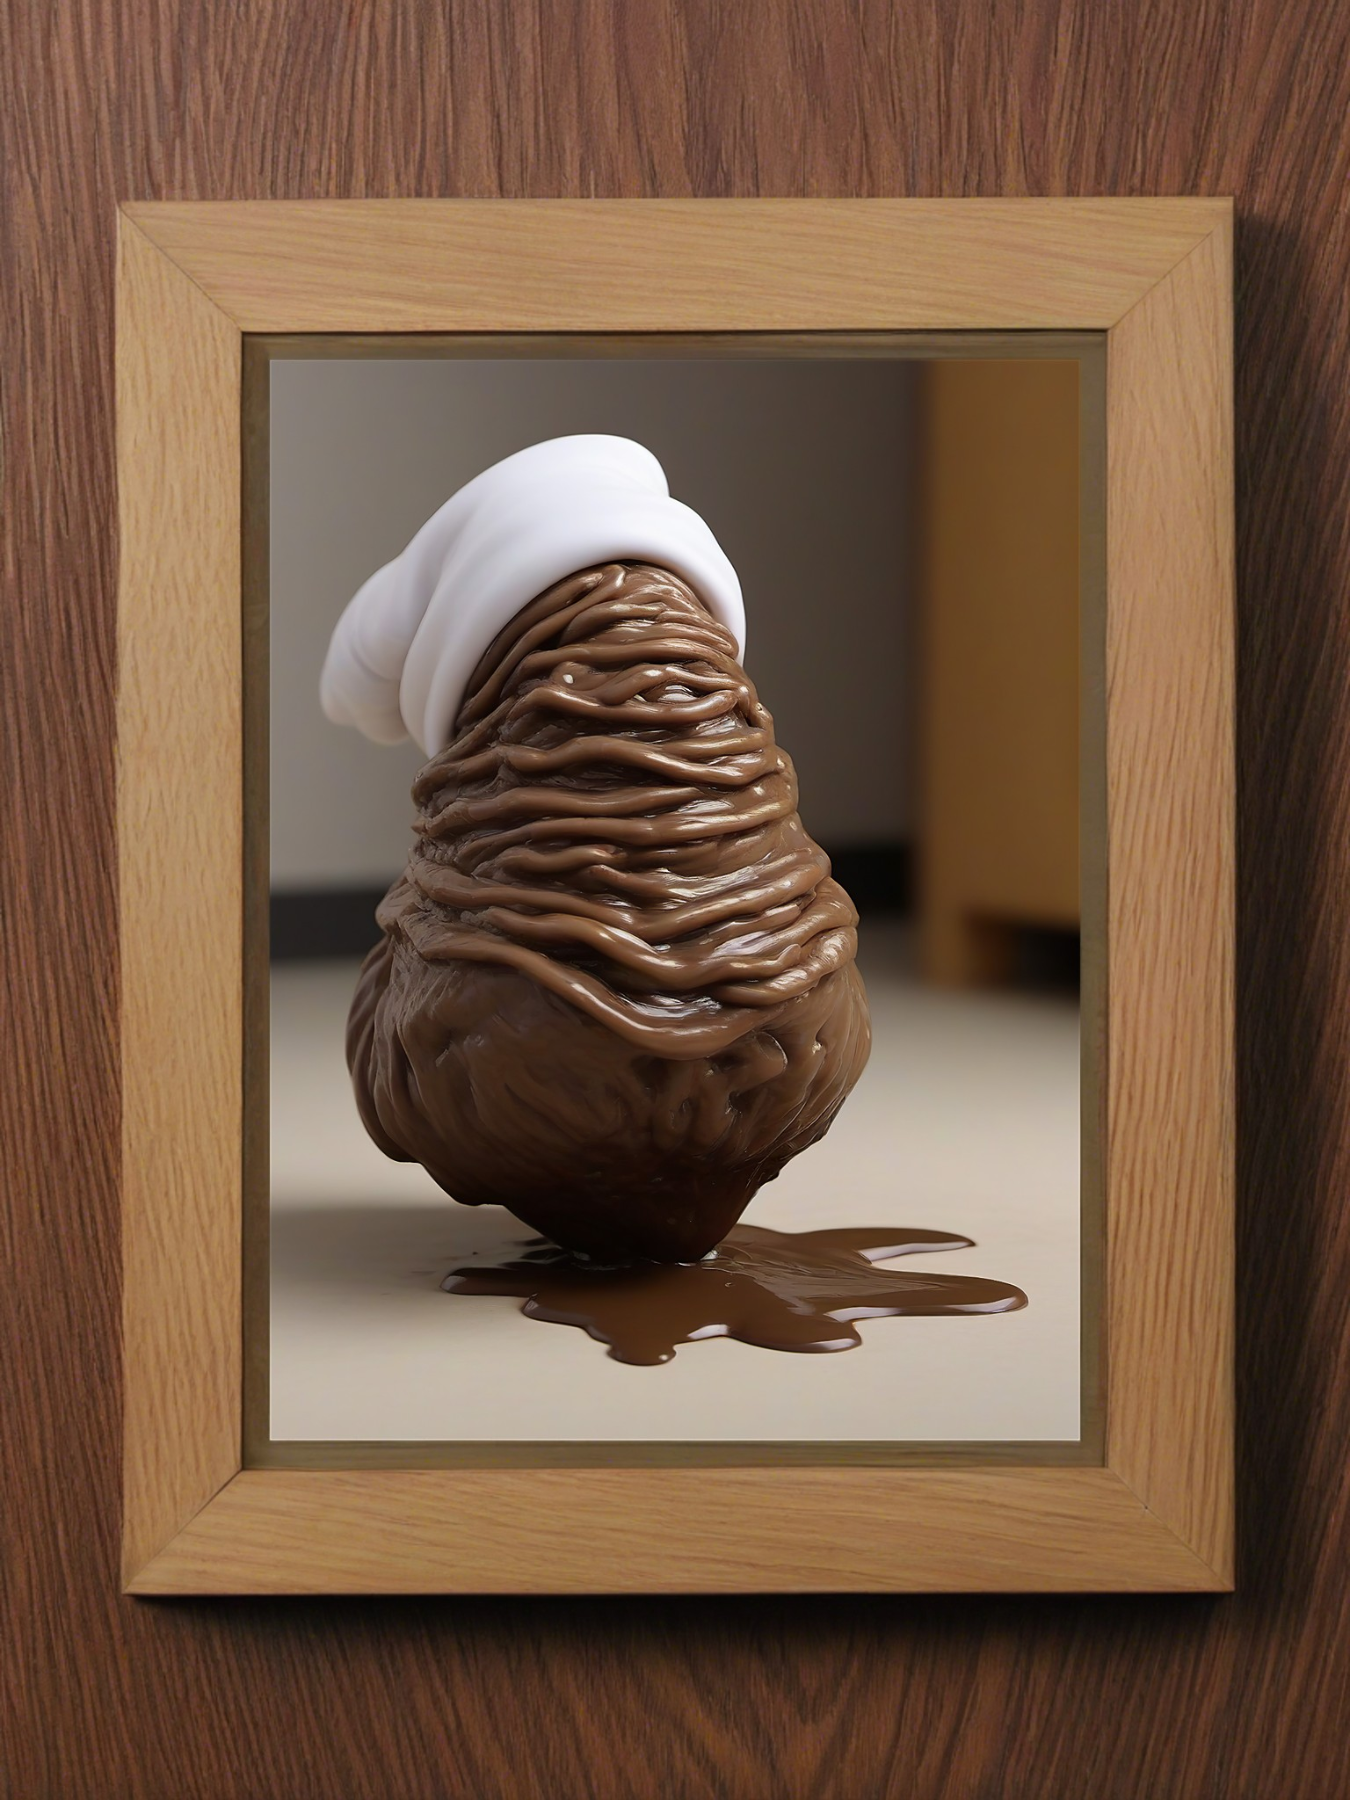 Disgusting piece of poop with a stocking cap fantasy mini photo poster - 27x20 cm 3